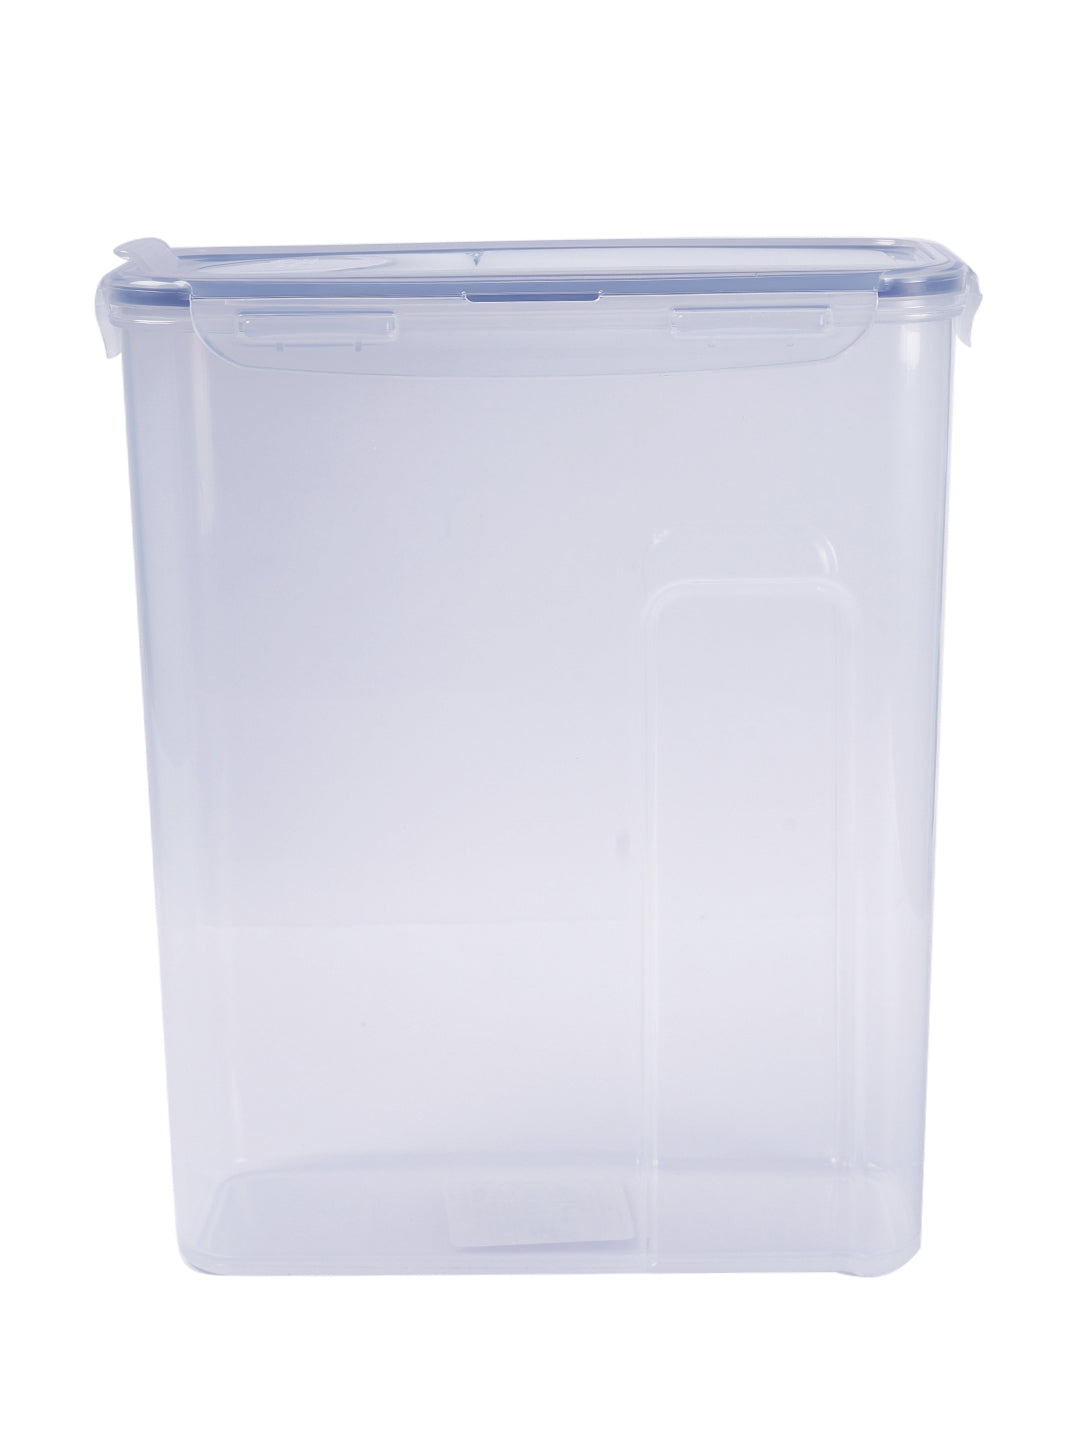 FLIP LID CONTAINER - 4.3LTR